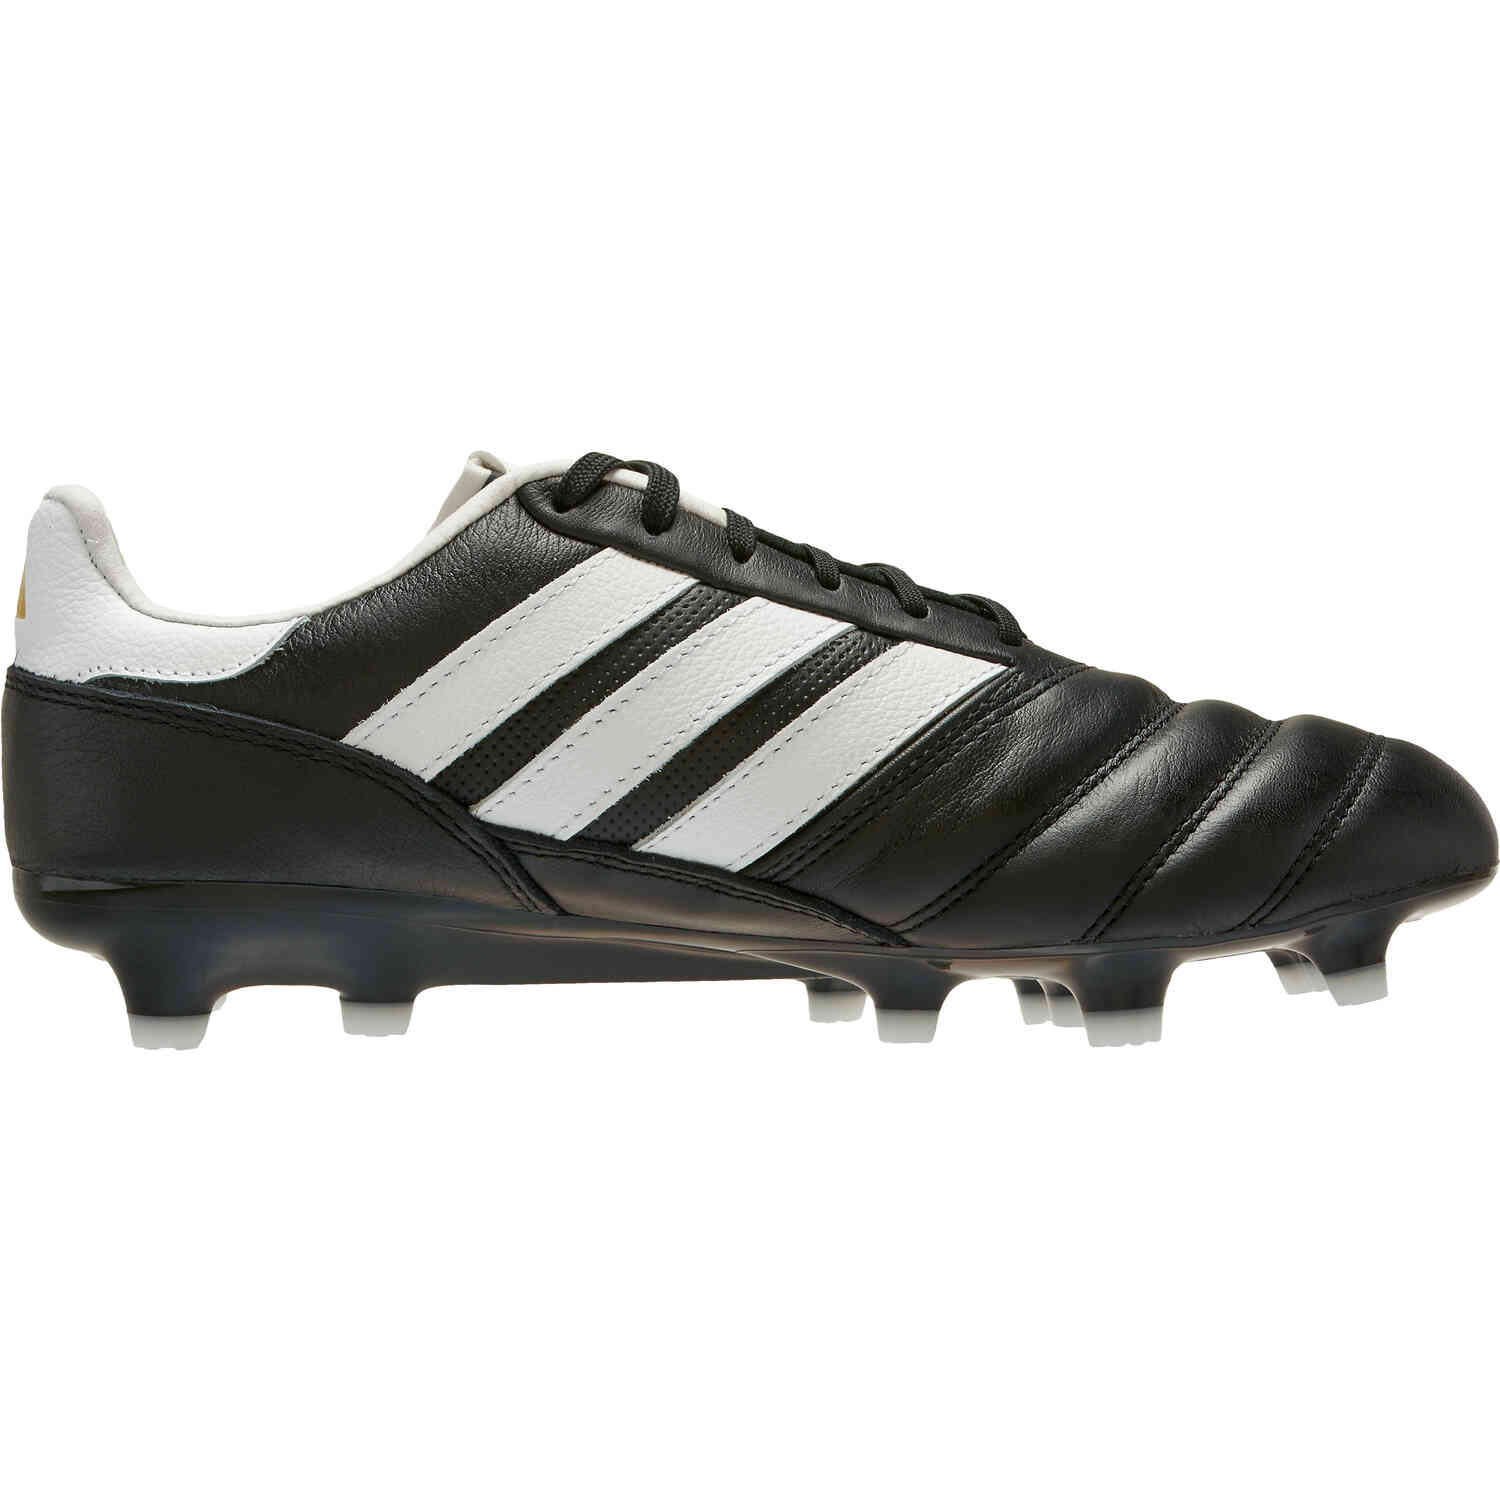 Adidas Copa Mundial Leather Soccer Boots Size US 11.5 EU 45